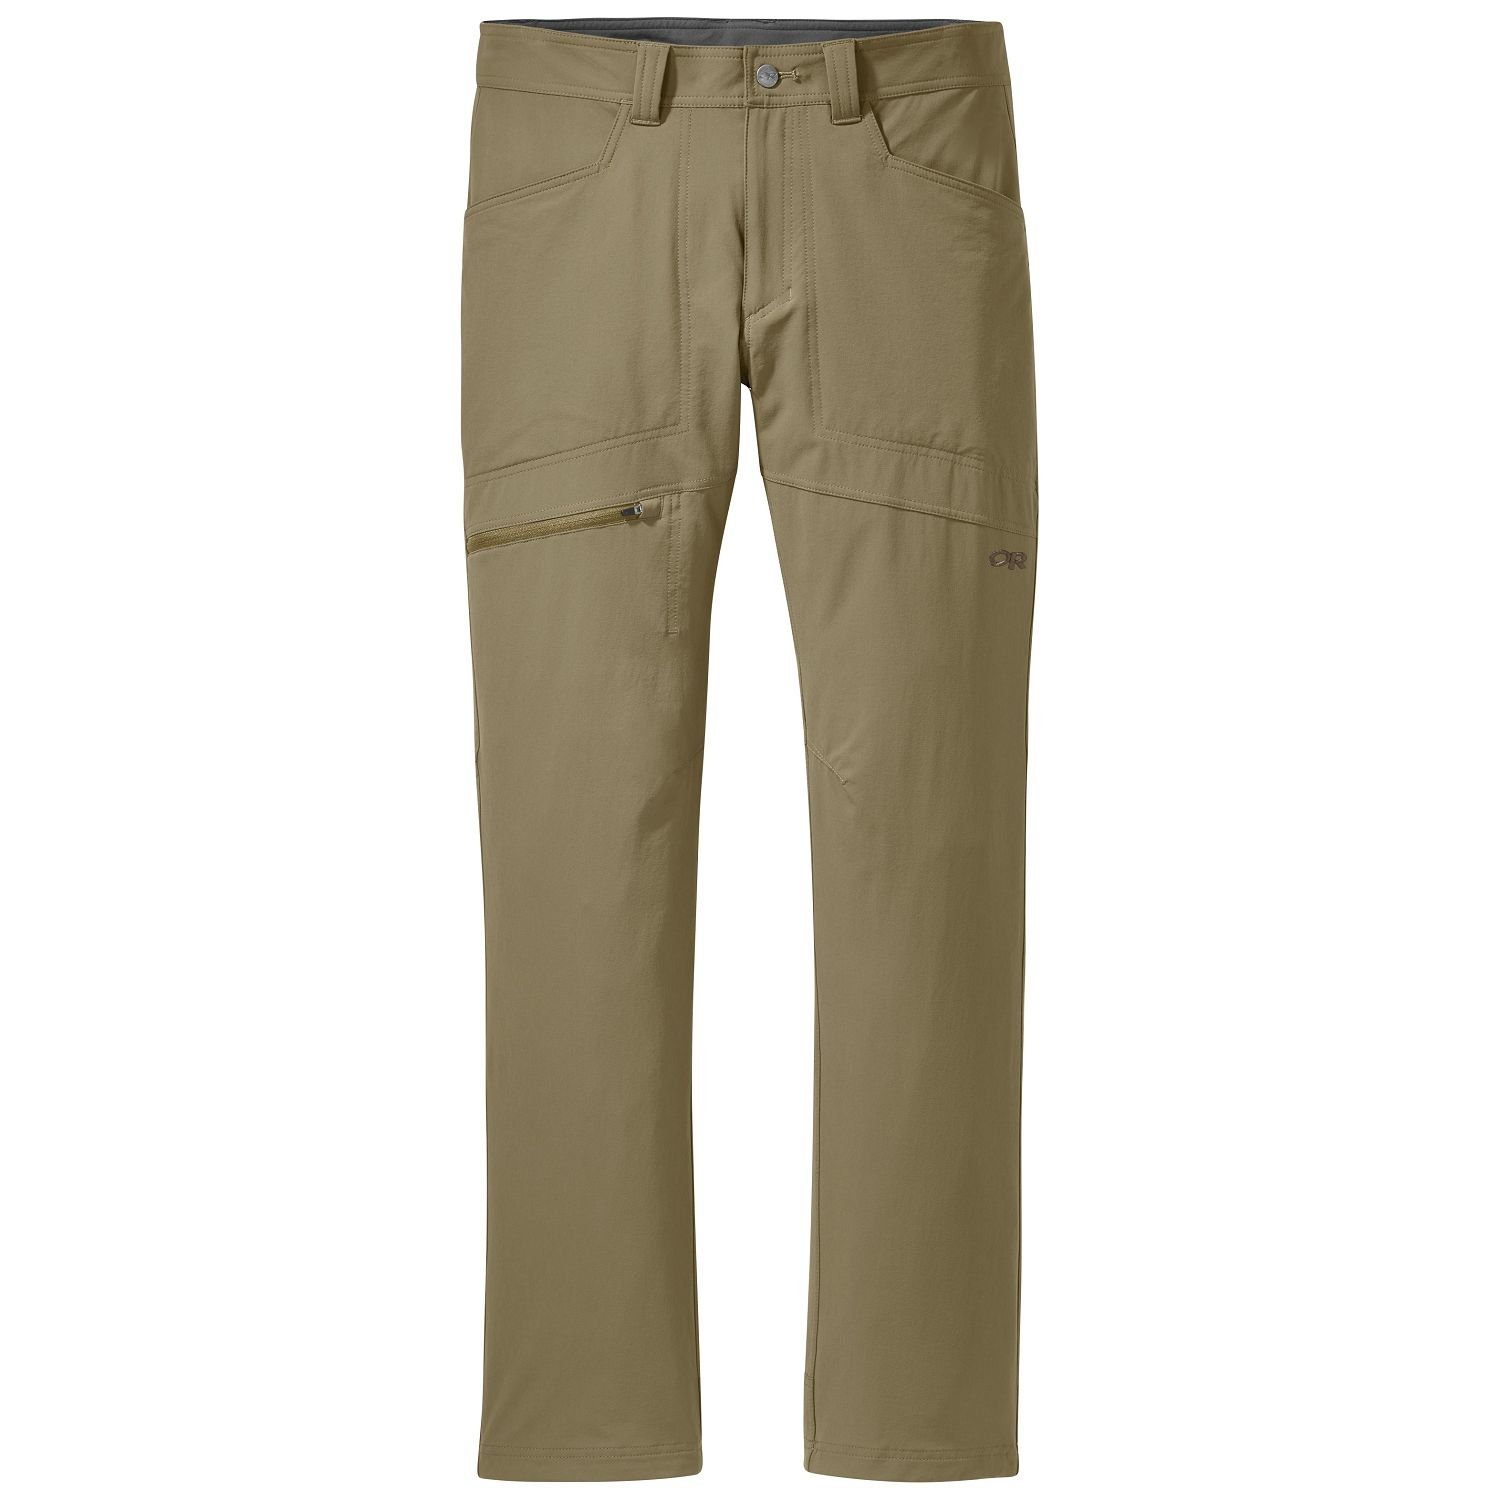 Outdoor Research Laufhose Outdoor Research Men's Voodoo Pants - 32" (1-tlg) braun